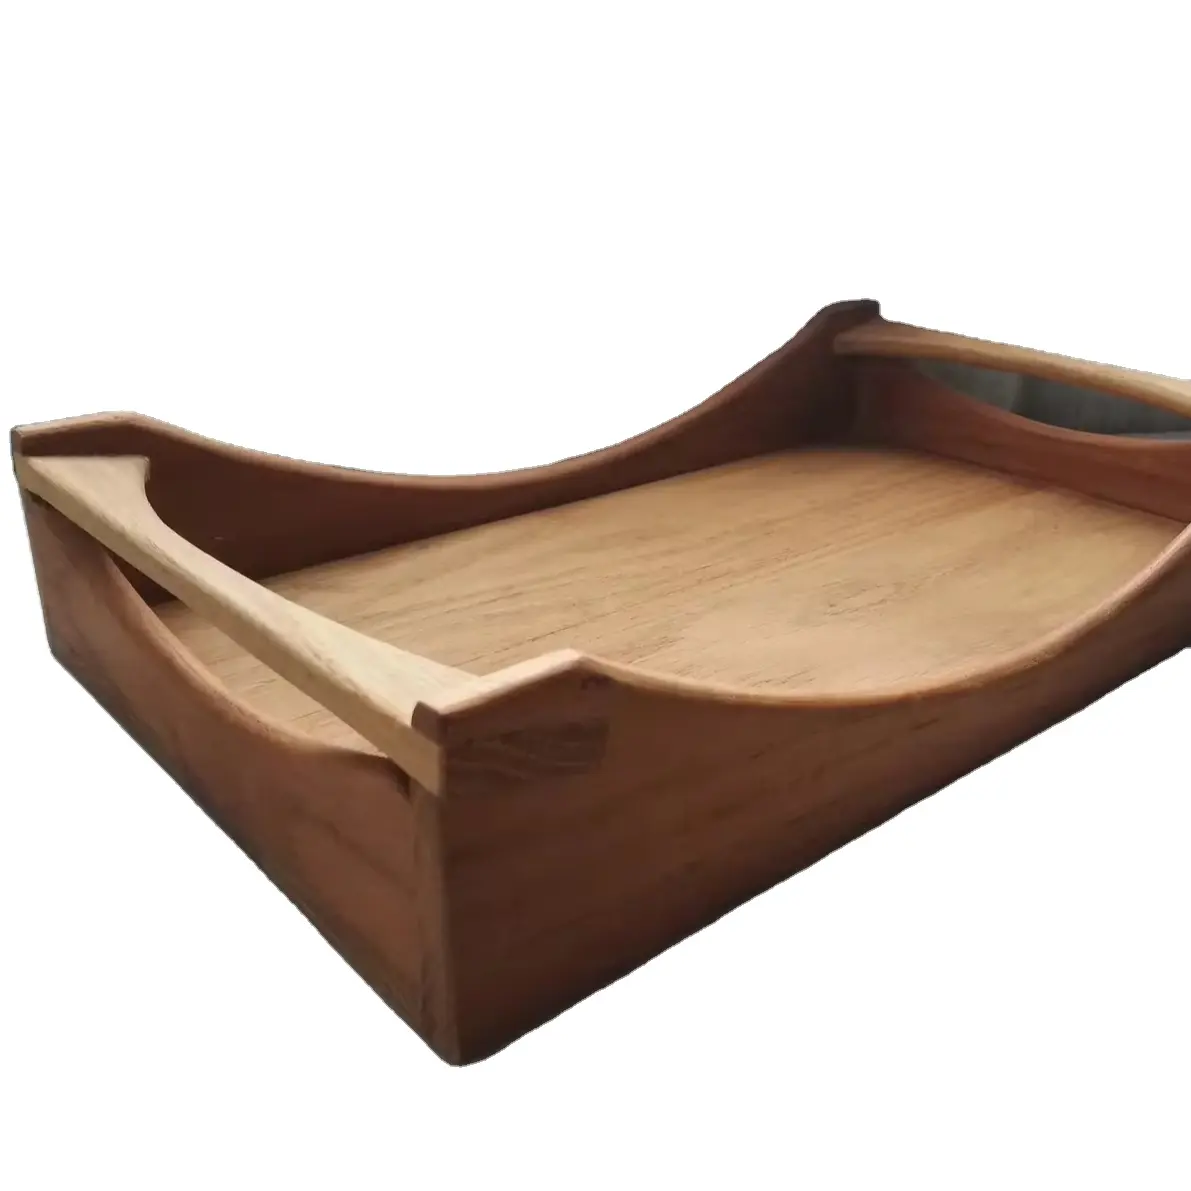 Hand crafted Wood Serving Tray Mango Wooden Danish Handmade Serving Board Bread Basket Tray Table Decor Eco friendly